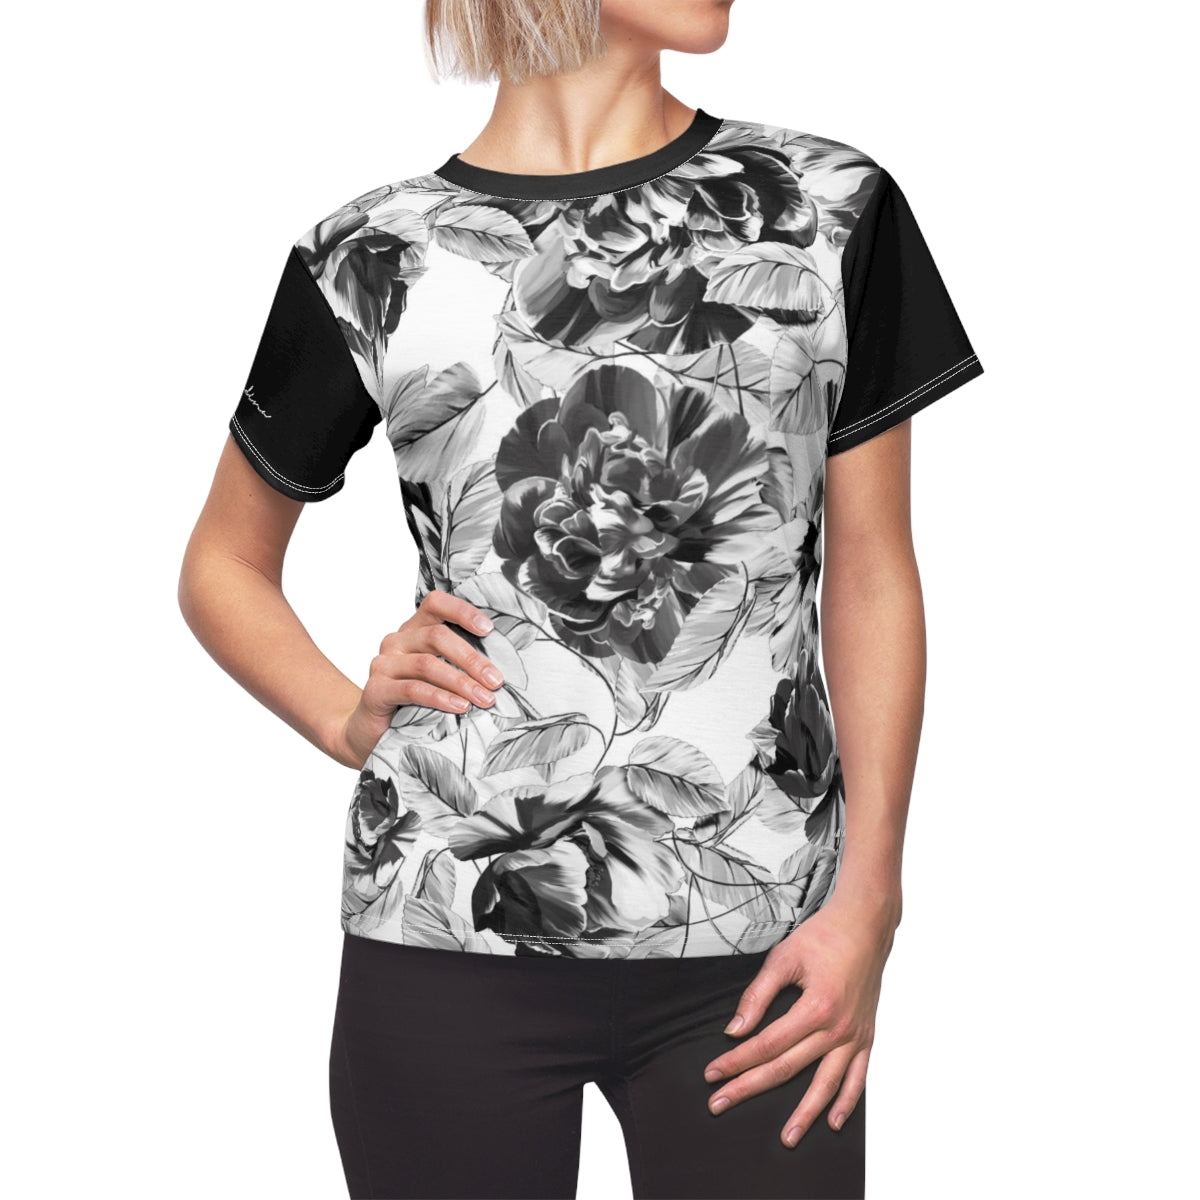 T-Shirt, Black-White Floral Look